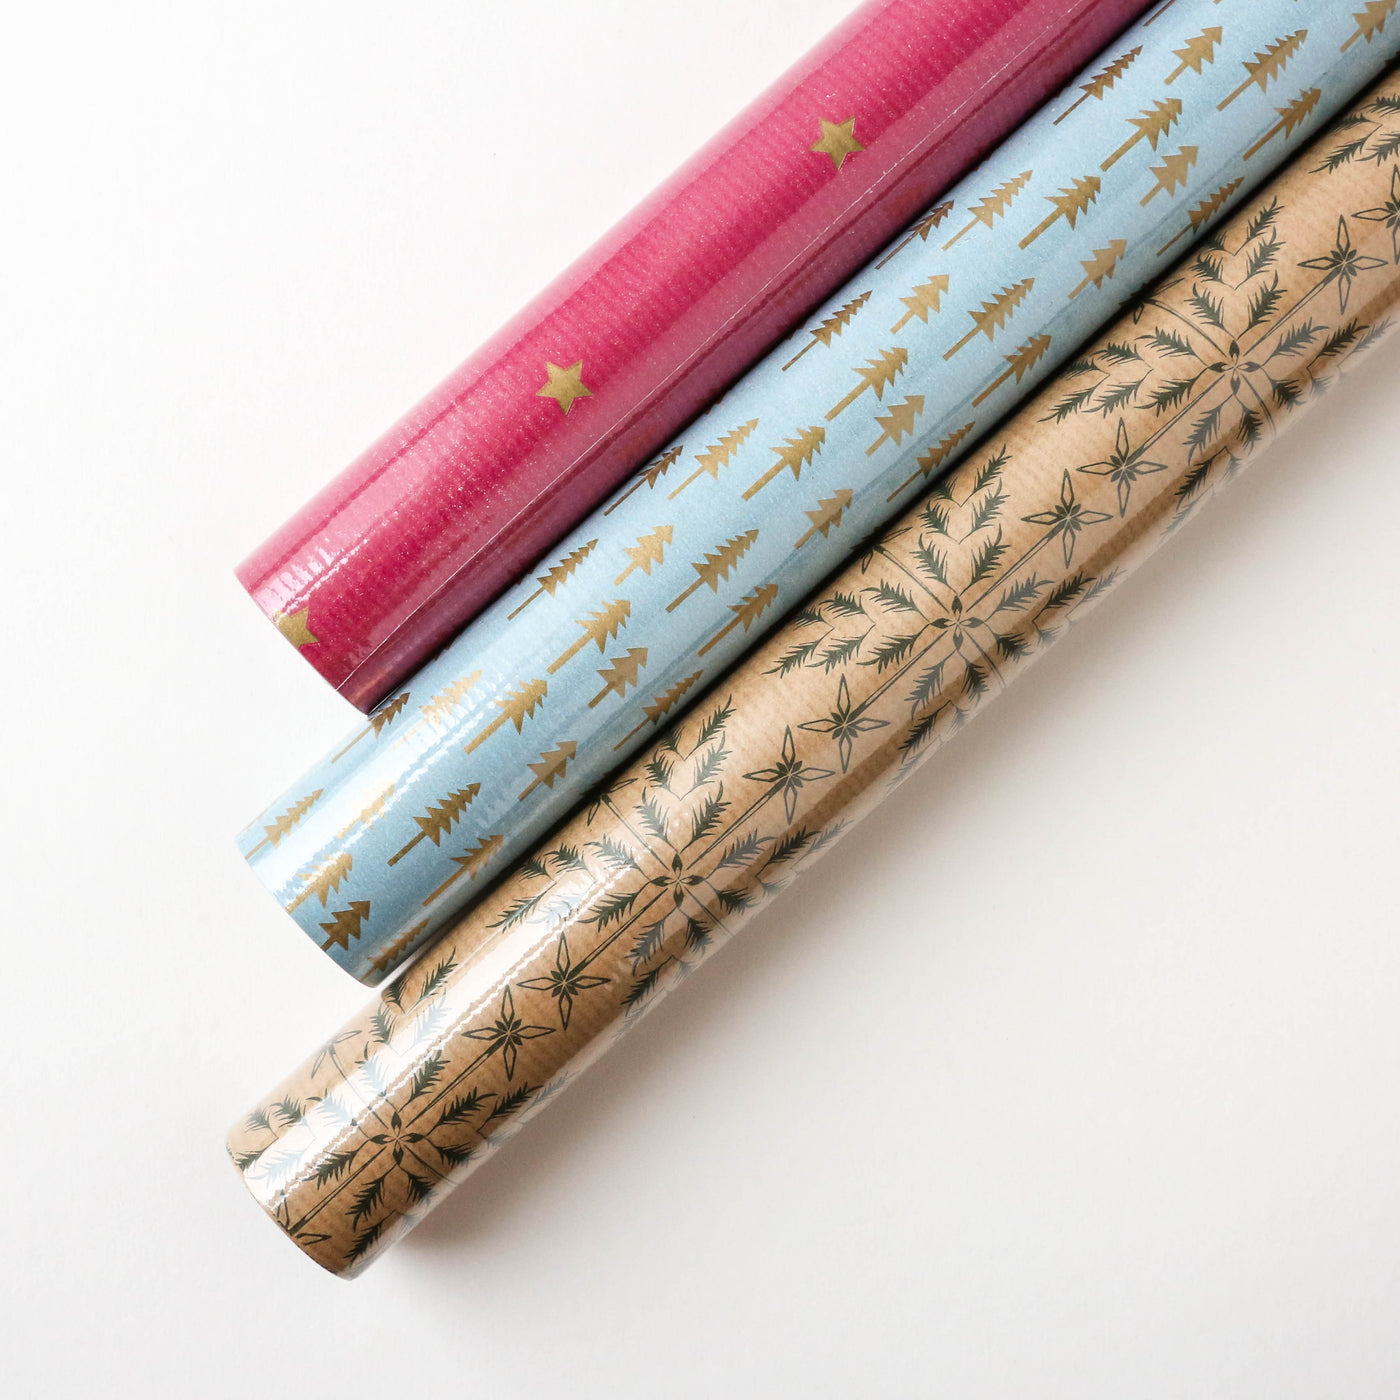 Three Rolls of Christmas Gift Wrap - Graphic Patterns